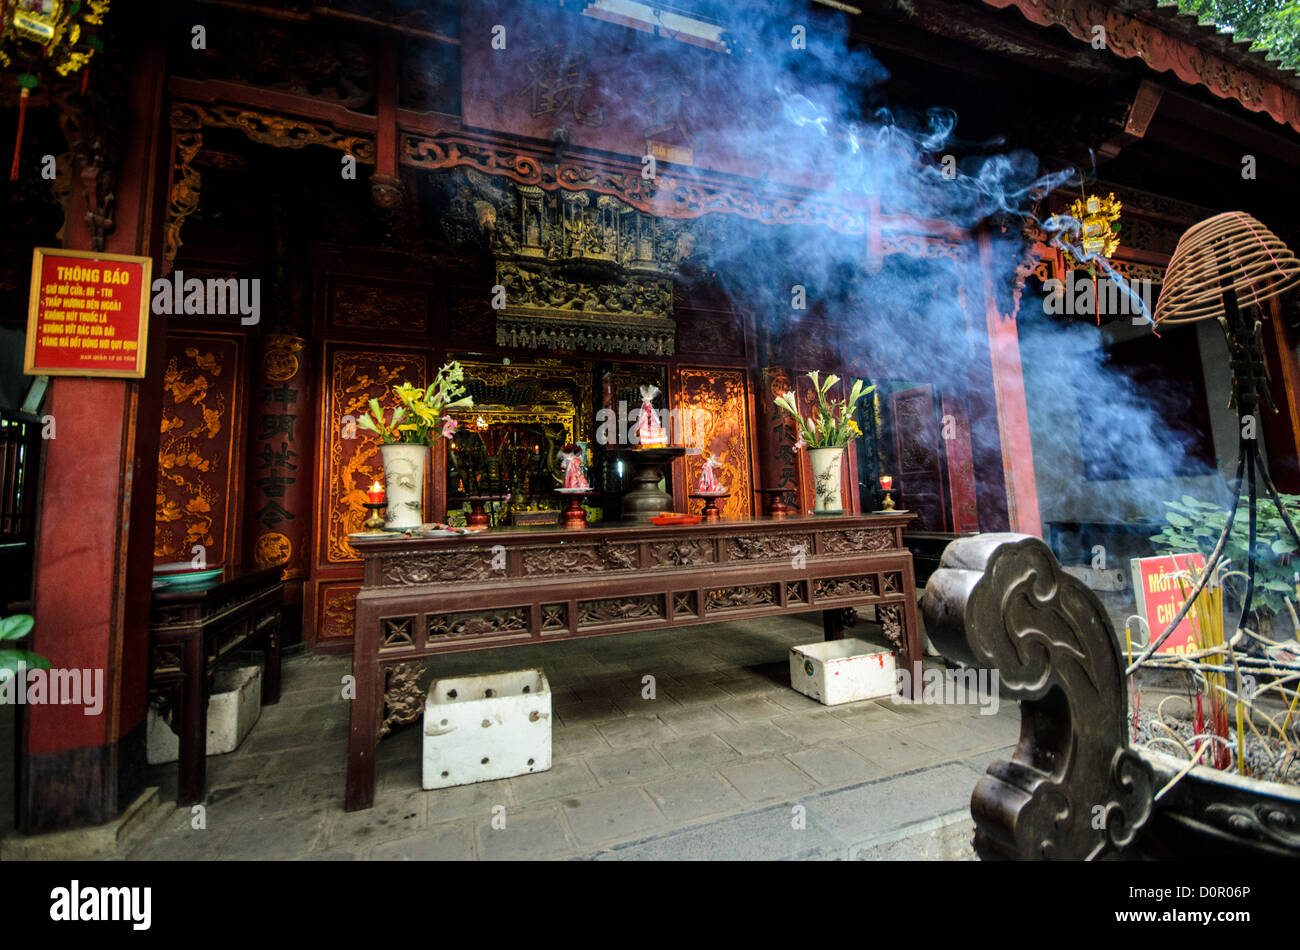 HANOI, Vietnam - Blue smoke from the burning incense wafts through the air outside Quan Thanh Temple in Hanoi. The Taoist temple dates back to the 11th century and is located close to West Lake. Stock Photo